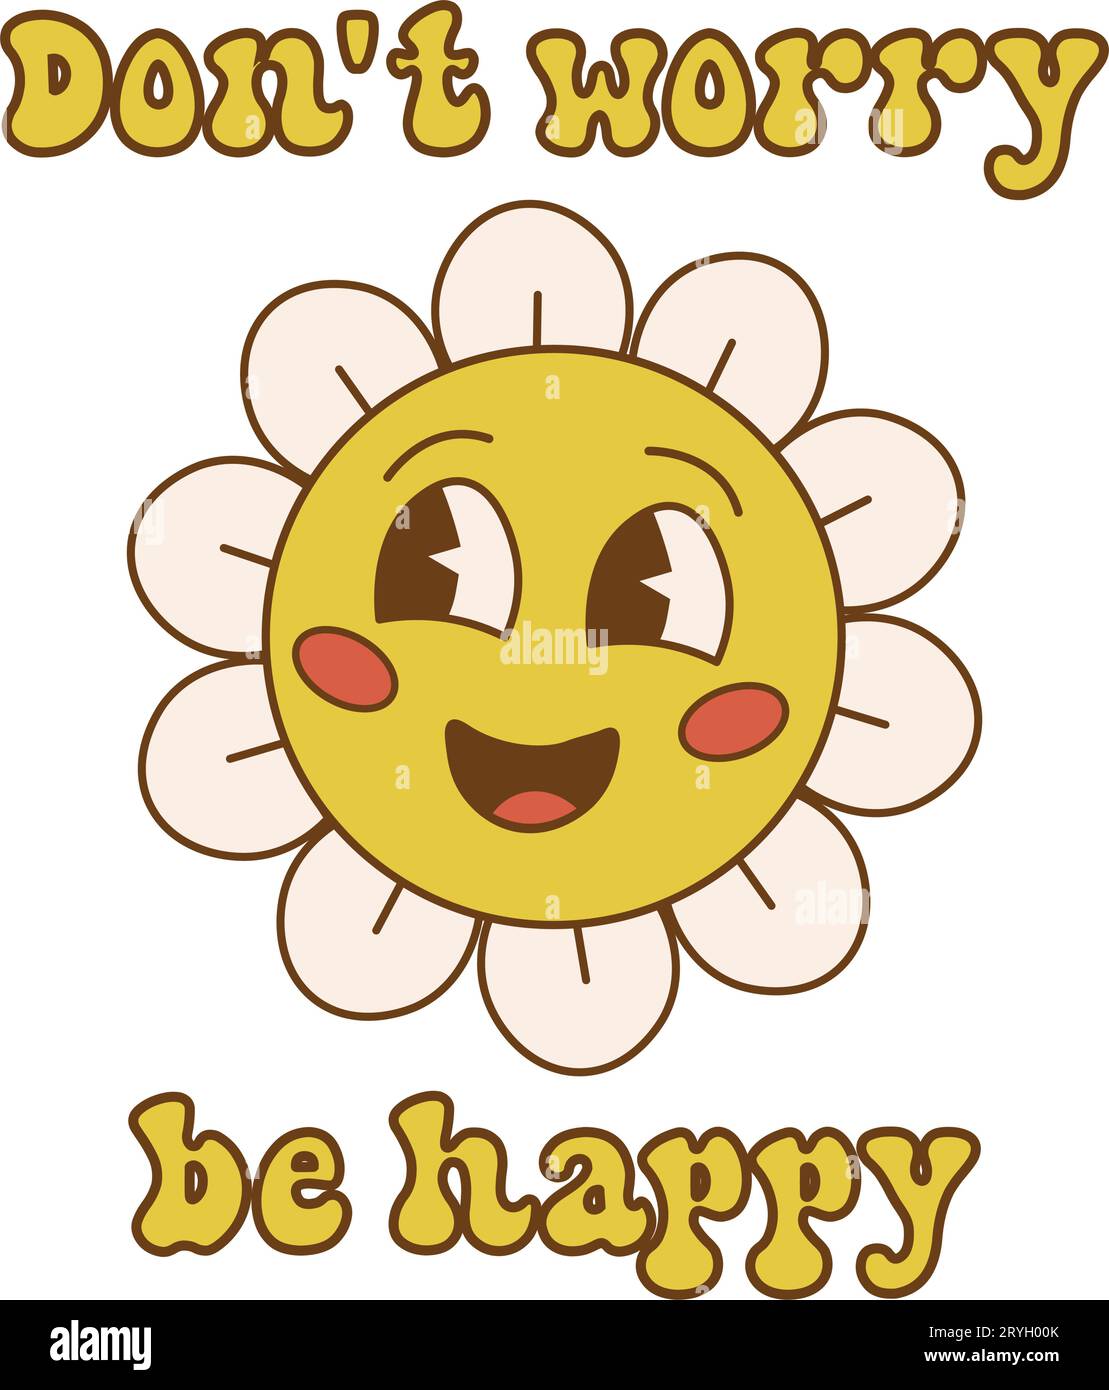 Don't worry be happy.Groovy retro clipart with daisy flower. 60s, 70s, 80s cartoon style. Abstract trendy, vintage, nostalgic aesthetic background. Ve Stock Vector